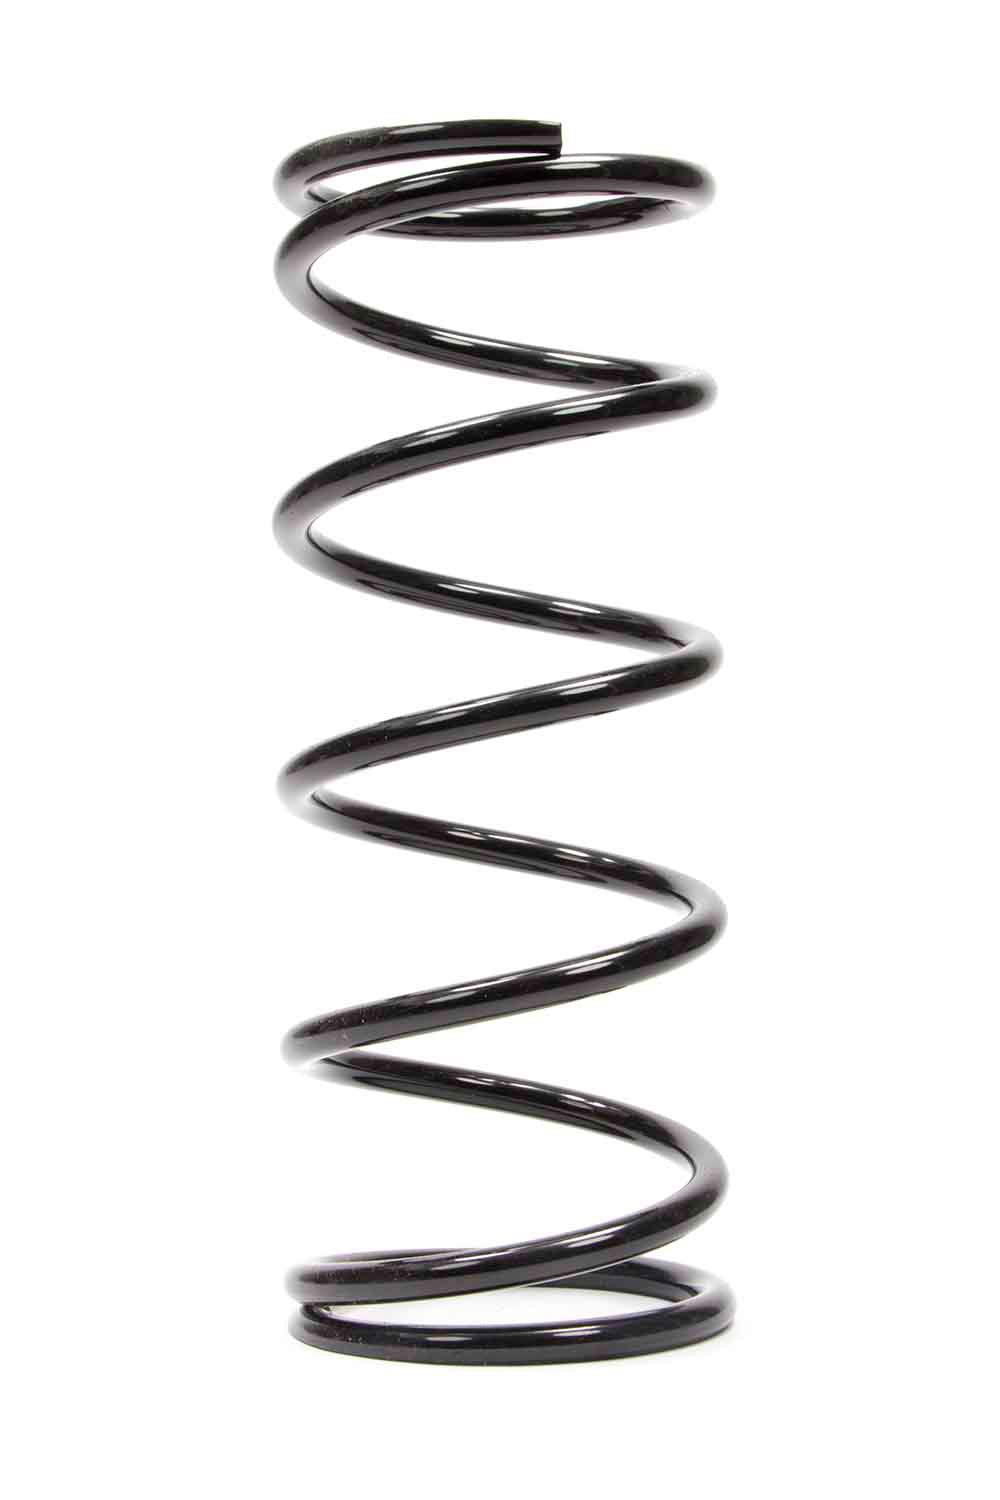 Conv Rear Spring 5in x 13in x 250 - Burlile Performance Products